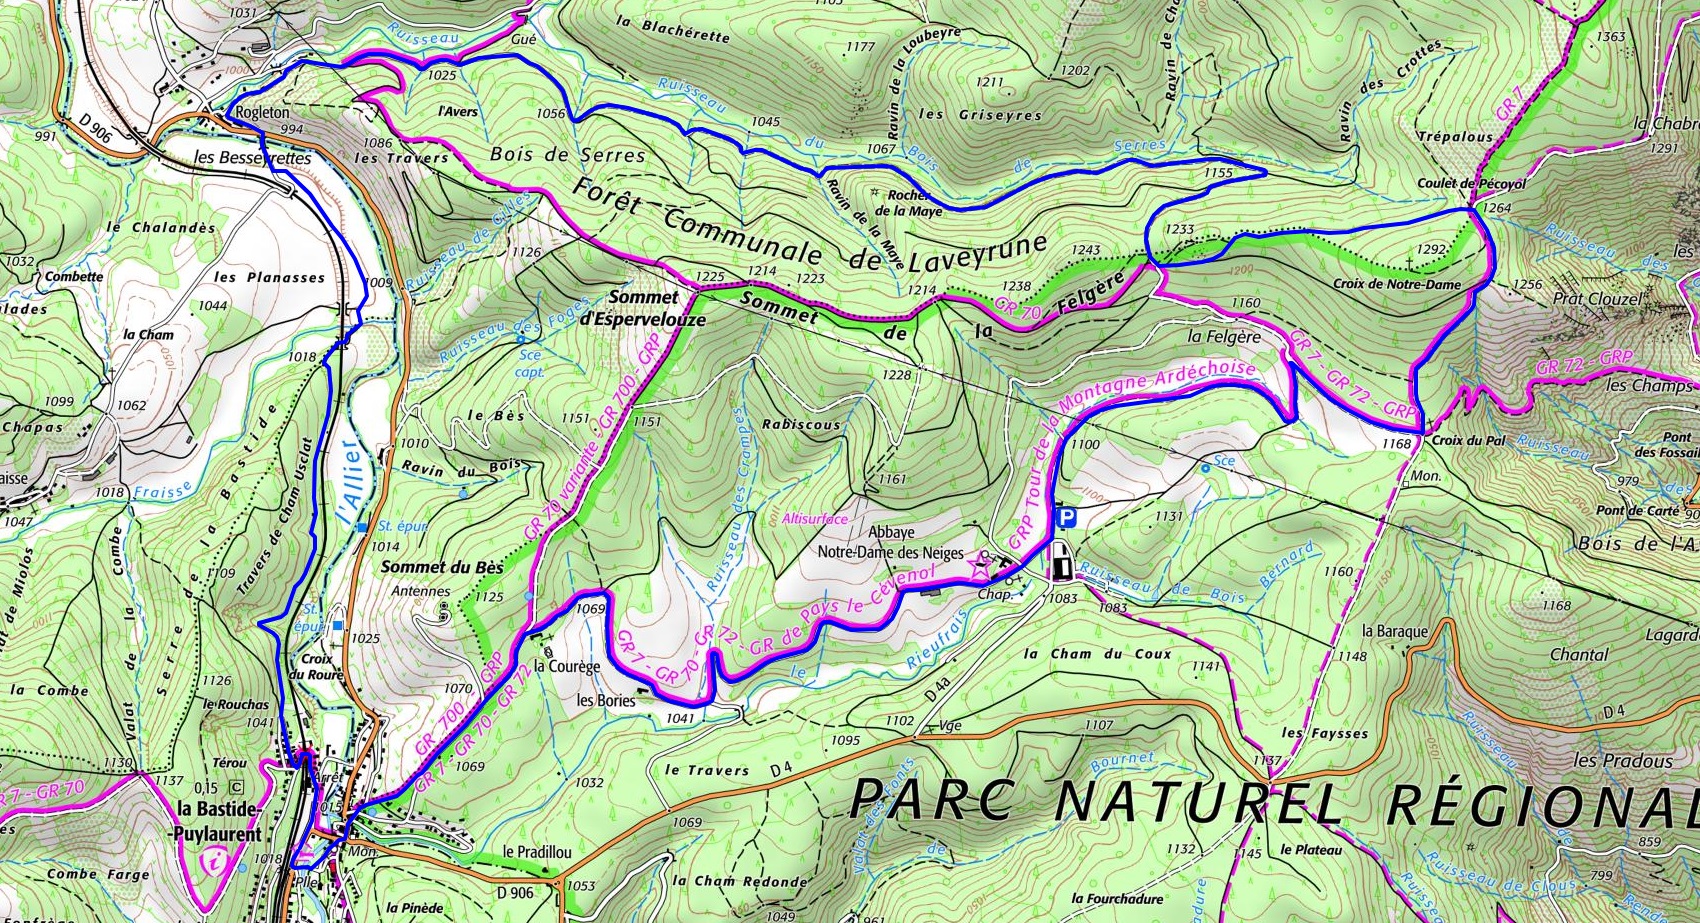 IGN 15.5km hike from La Bastide-Puylaurent in Lozere